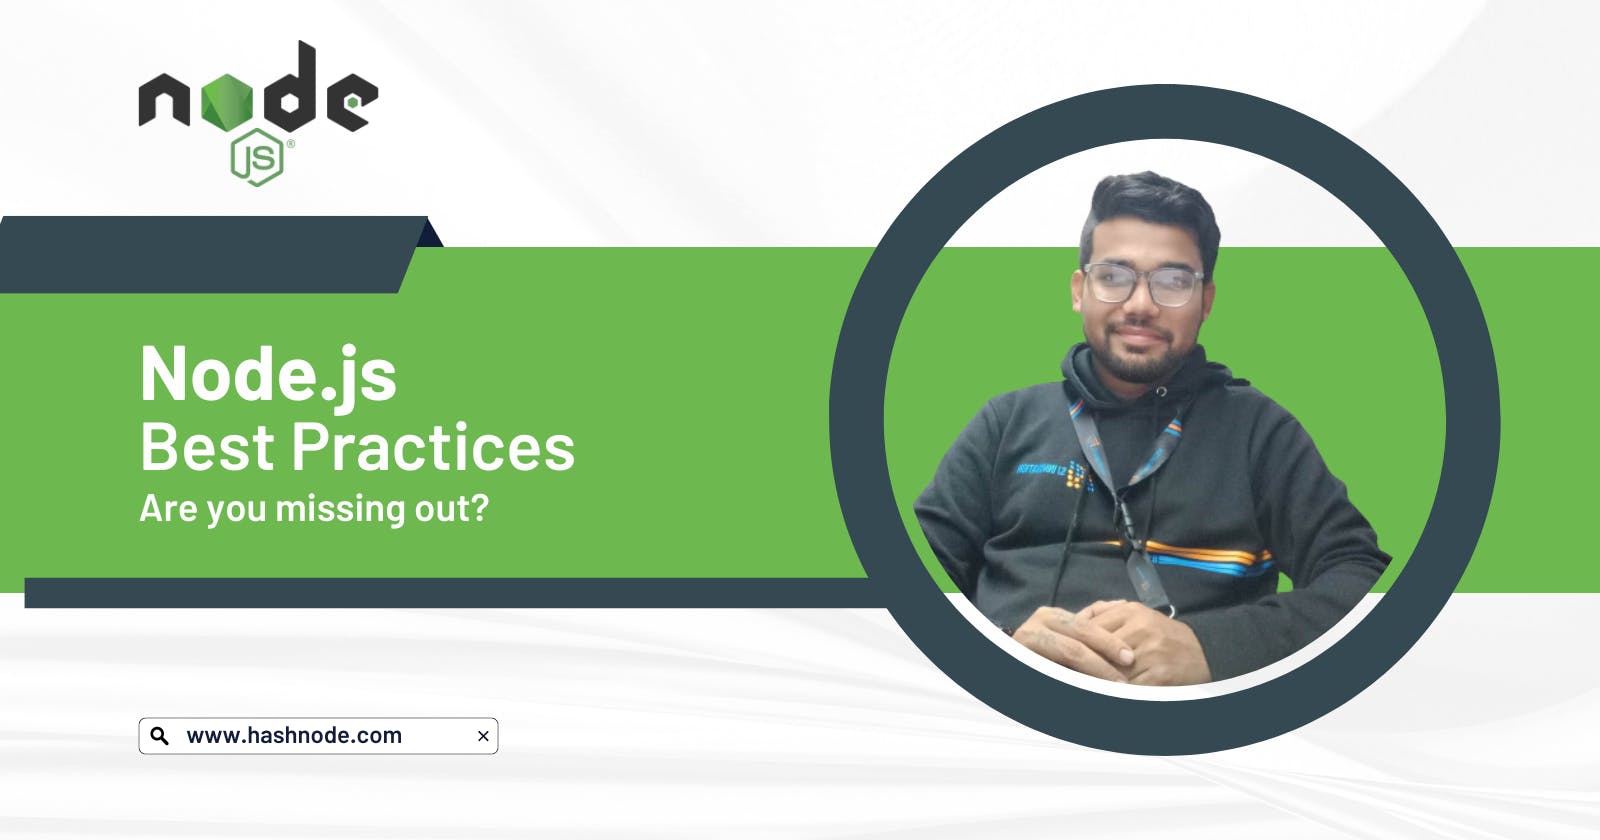 Node.js Best Practices - Are you missing out?